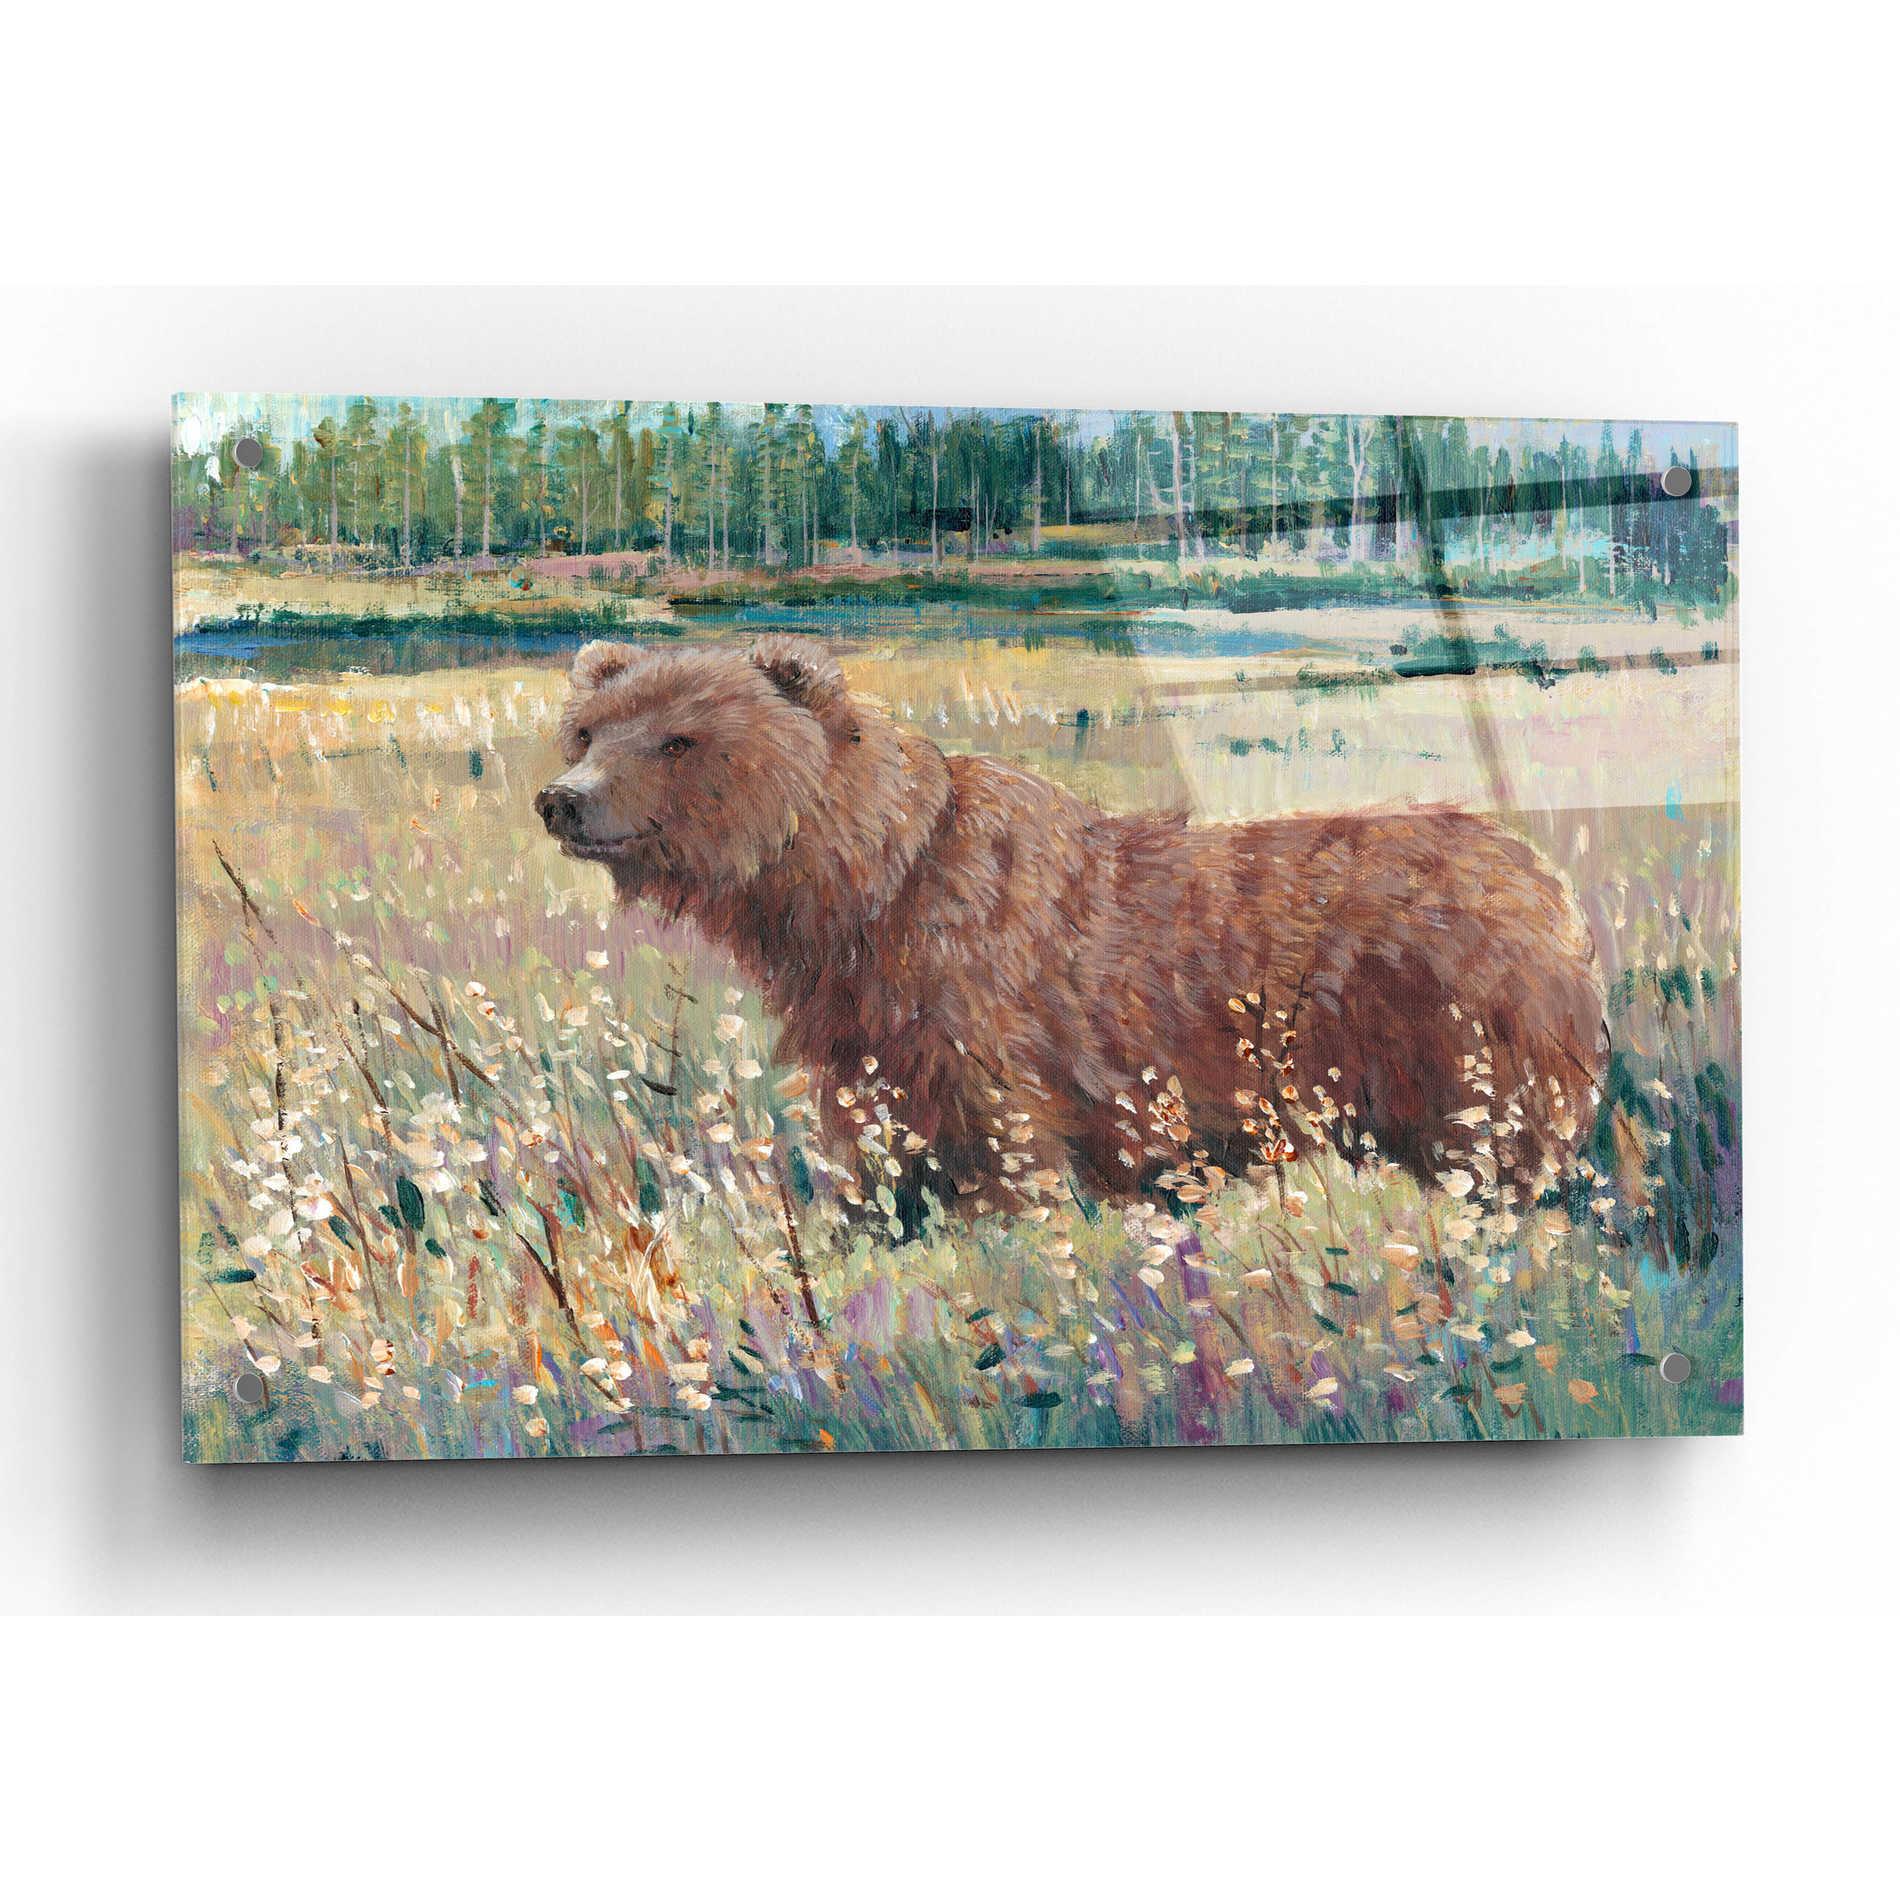 Epic Art 'Bear in the Field' by Tim O'Toole, Acrylic Glass Wall Art,36x24